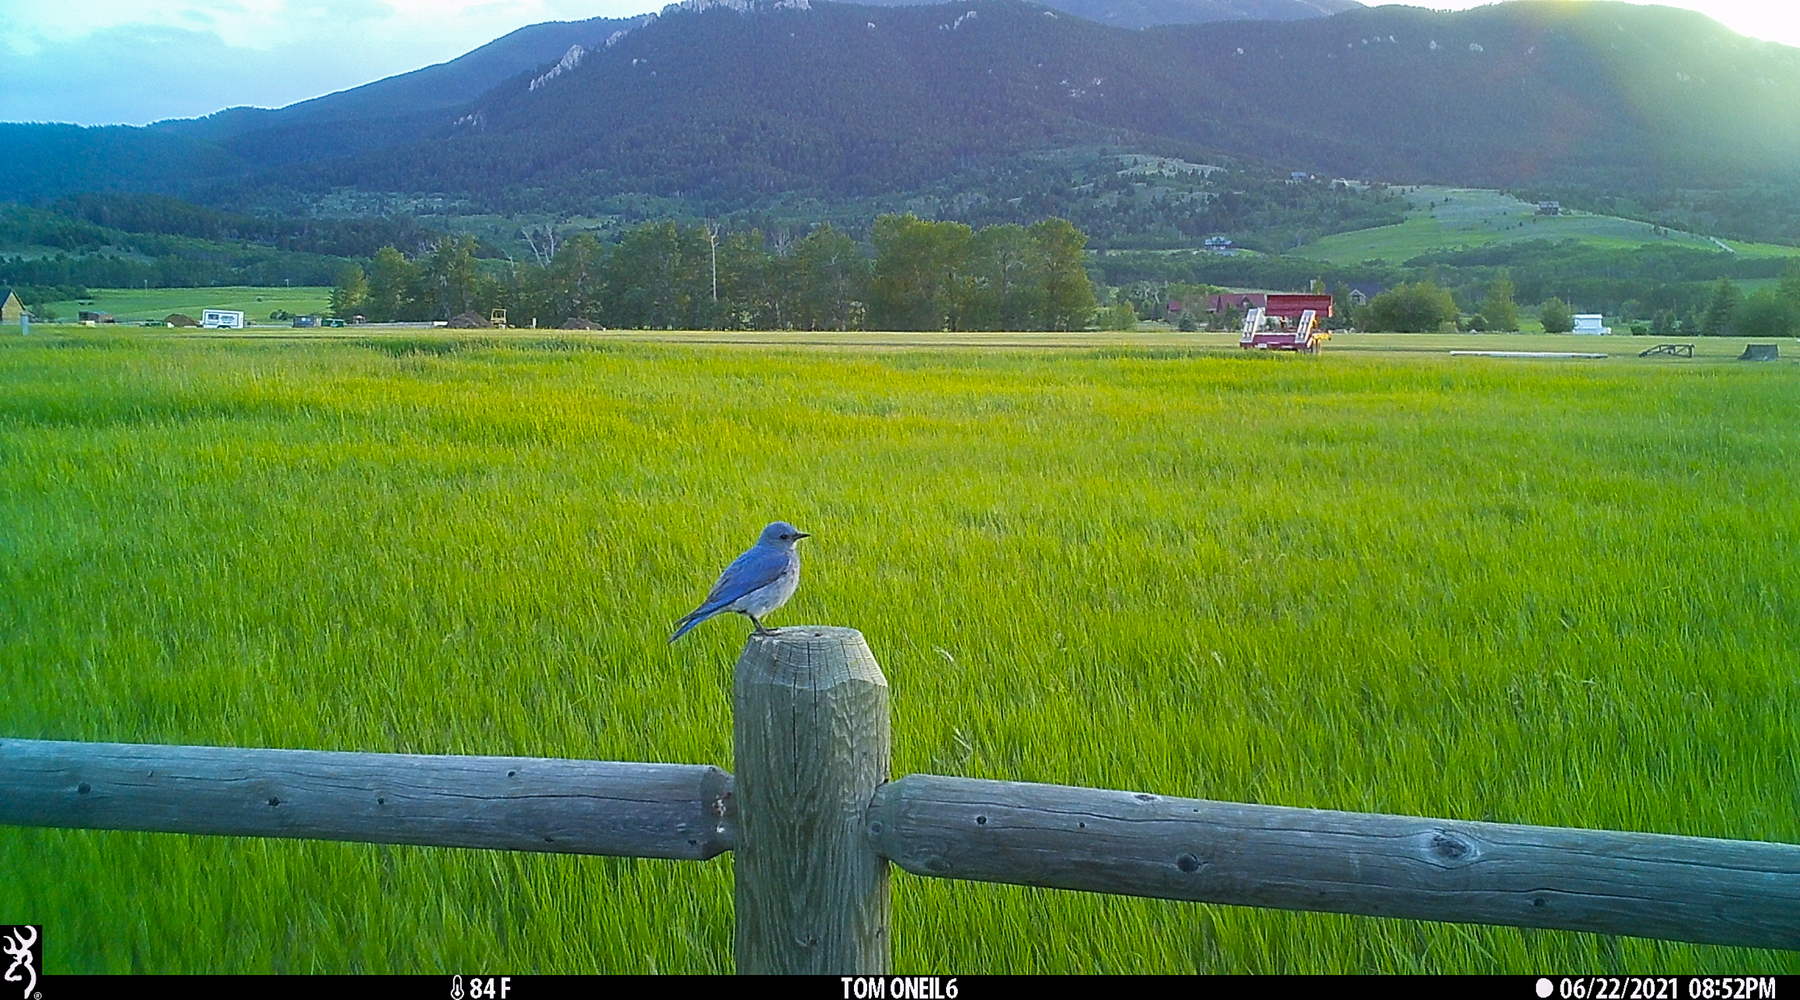 Mountain Bluebird, Red Lodge, MT.  Click for next photo.